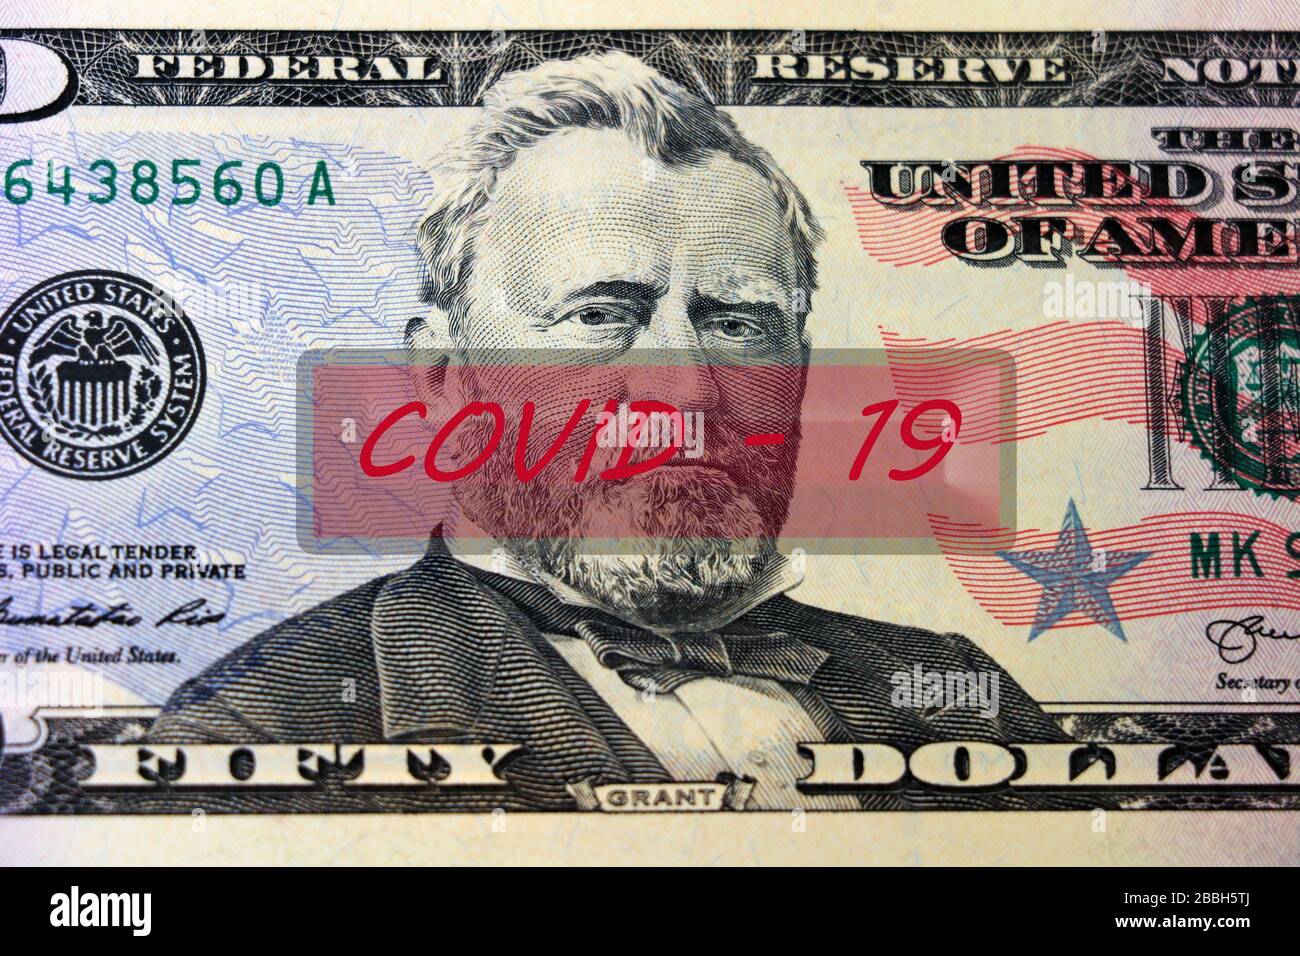 COVID-19 coronavirus in USA. 50 dollar money bill with coronavirus . COVID-19 affects global stock market. Crisis and finance concept. World economy hit by corona virus outbreak and pandemic fears Stock Photo